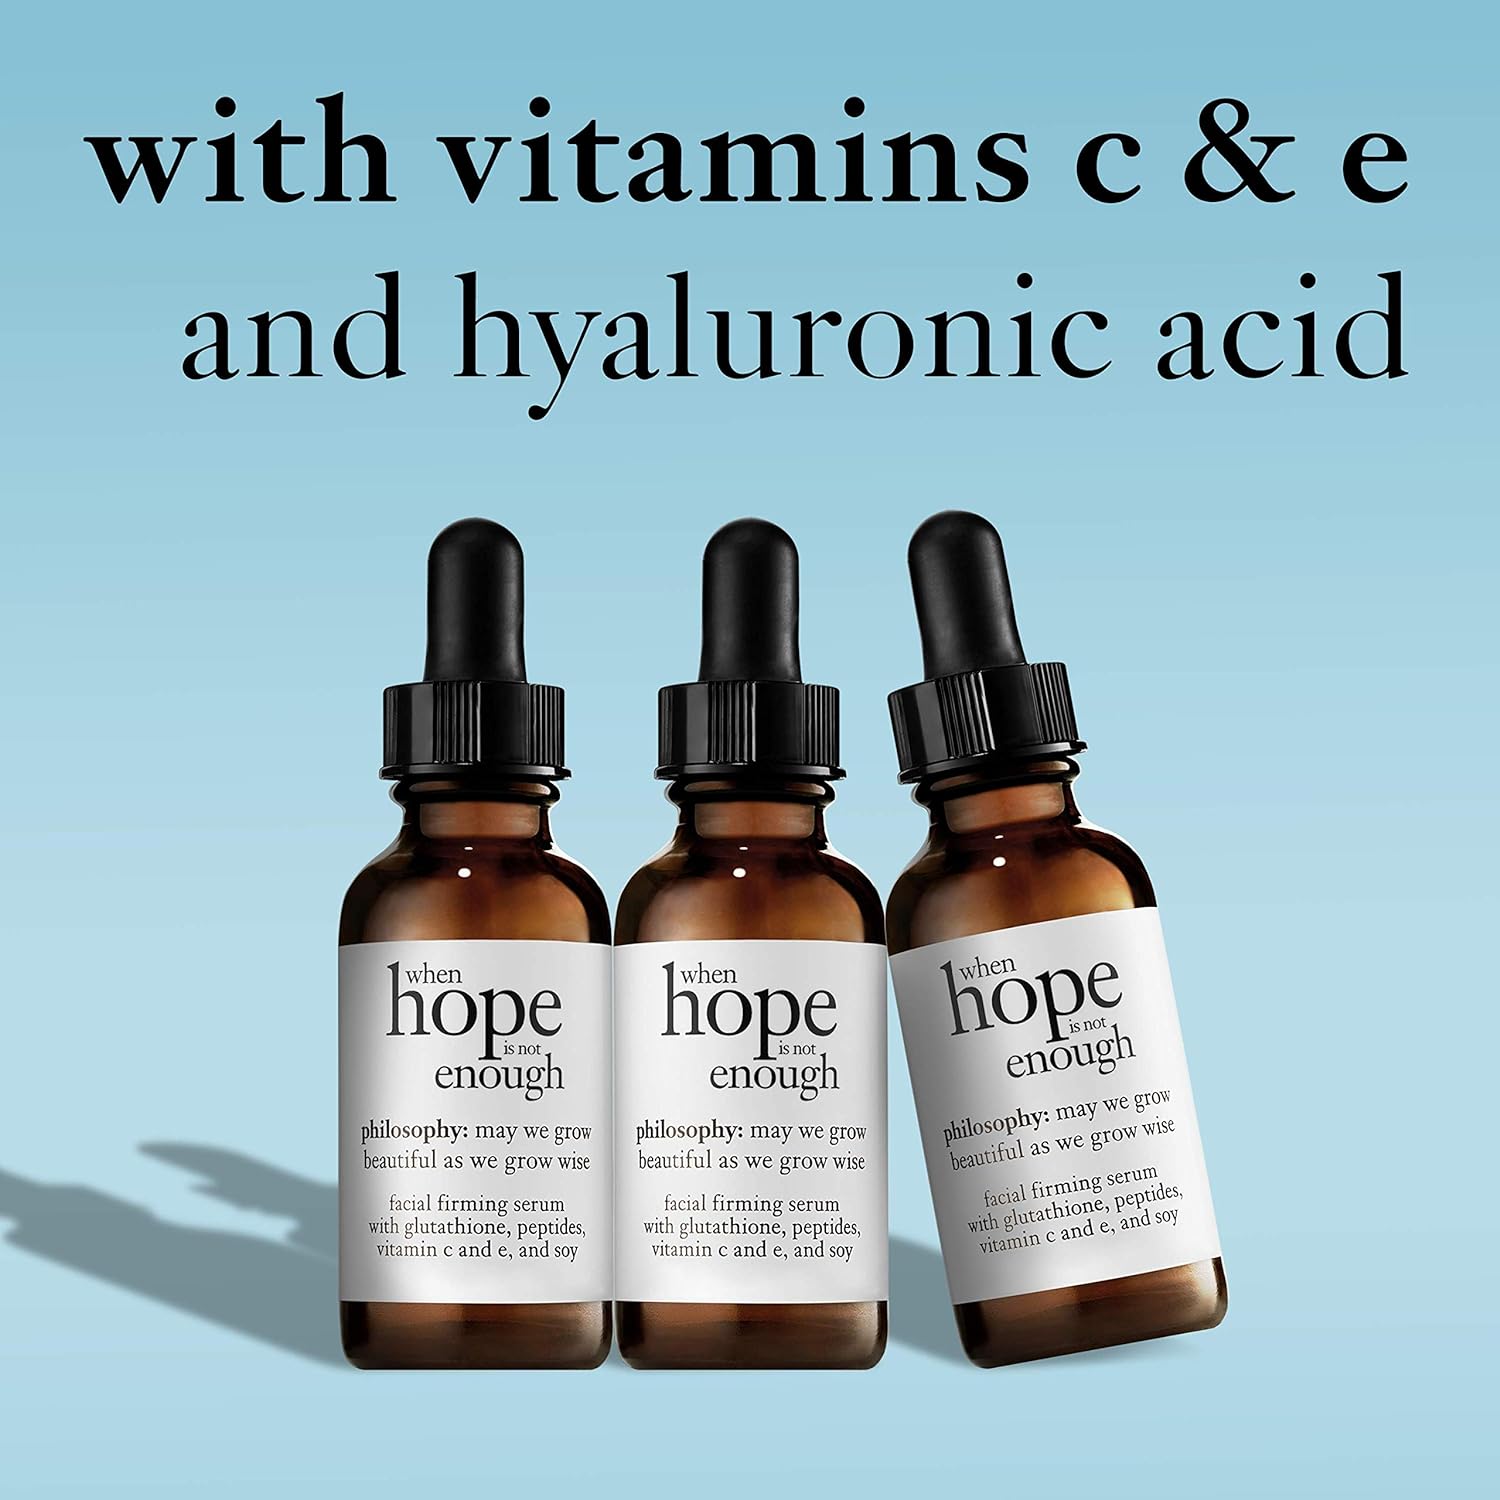 philosophy when hope is not enough - facial firming serum, 1 oz : Beauty & Personal Care